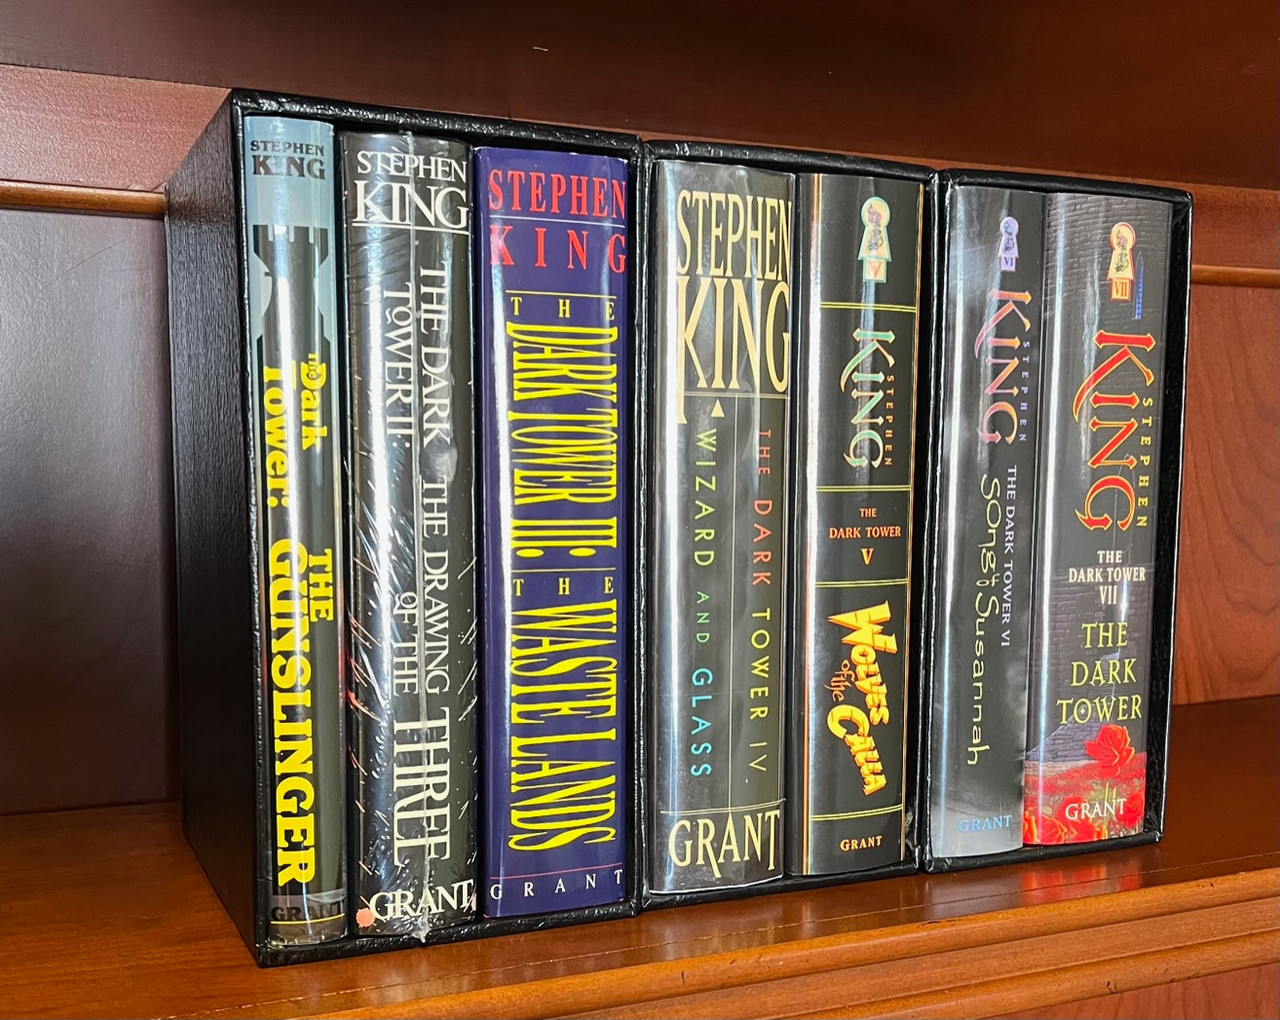 Stephen King "The Dark Tower" First Edition, First Printing, 7 Volume Set  w/Matching Slipcases